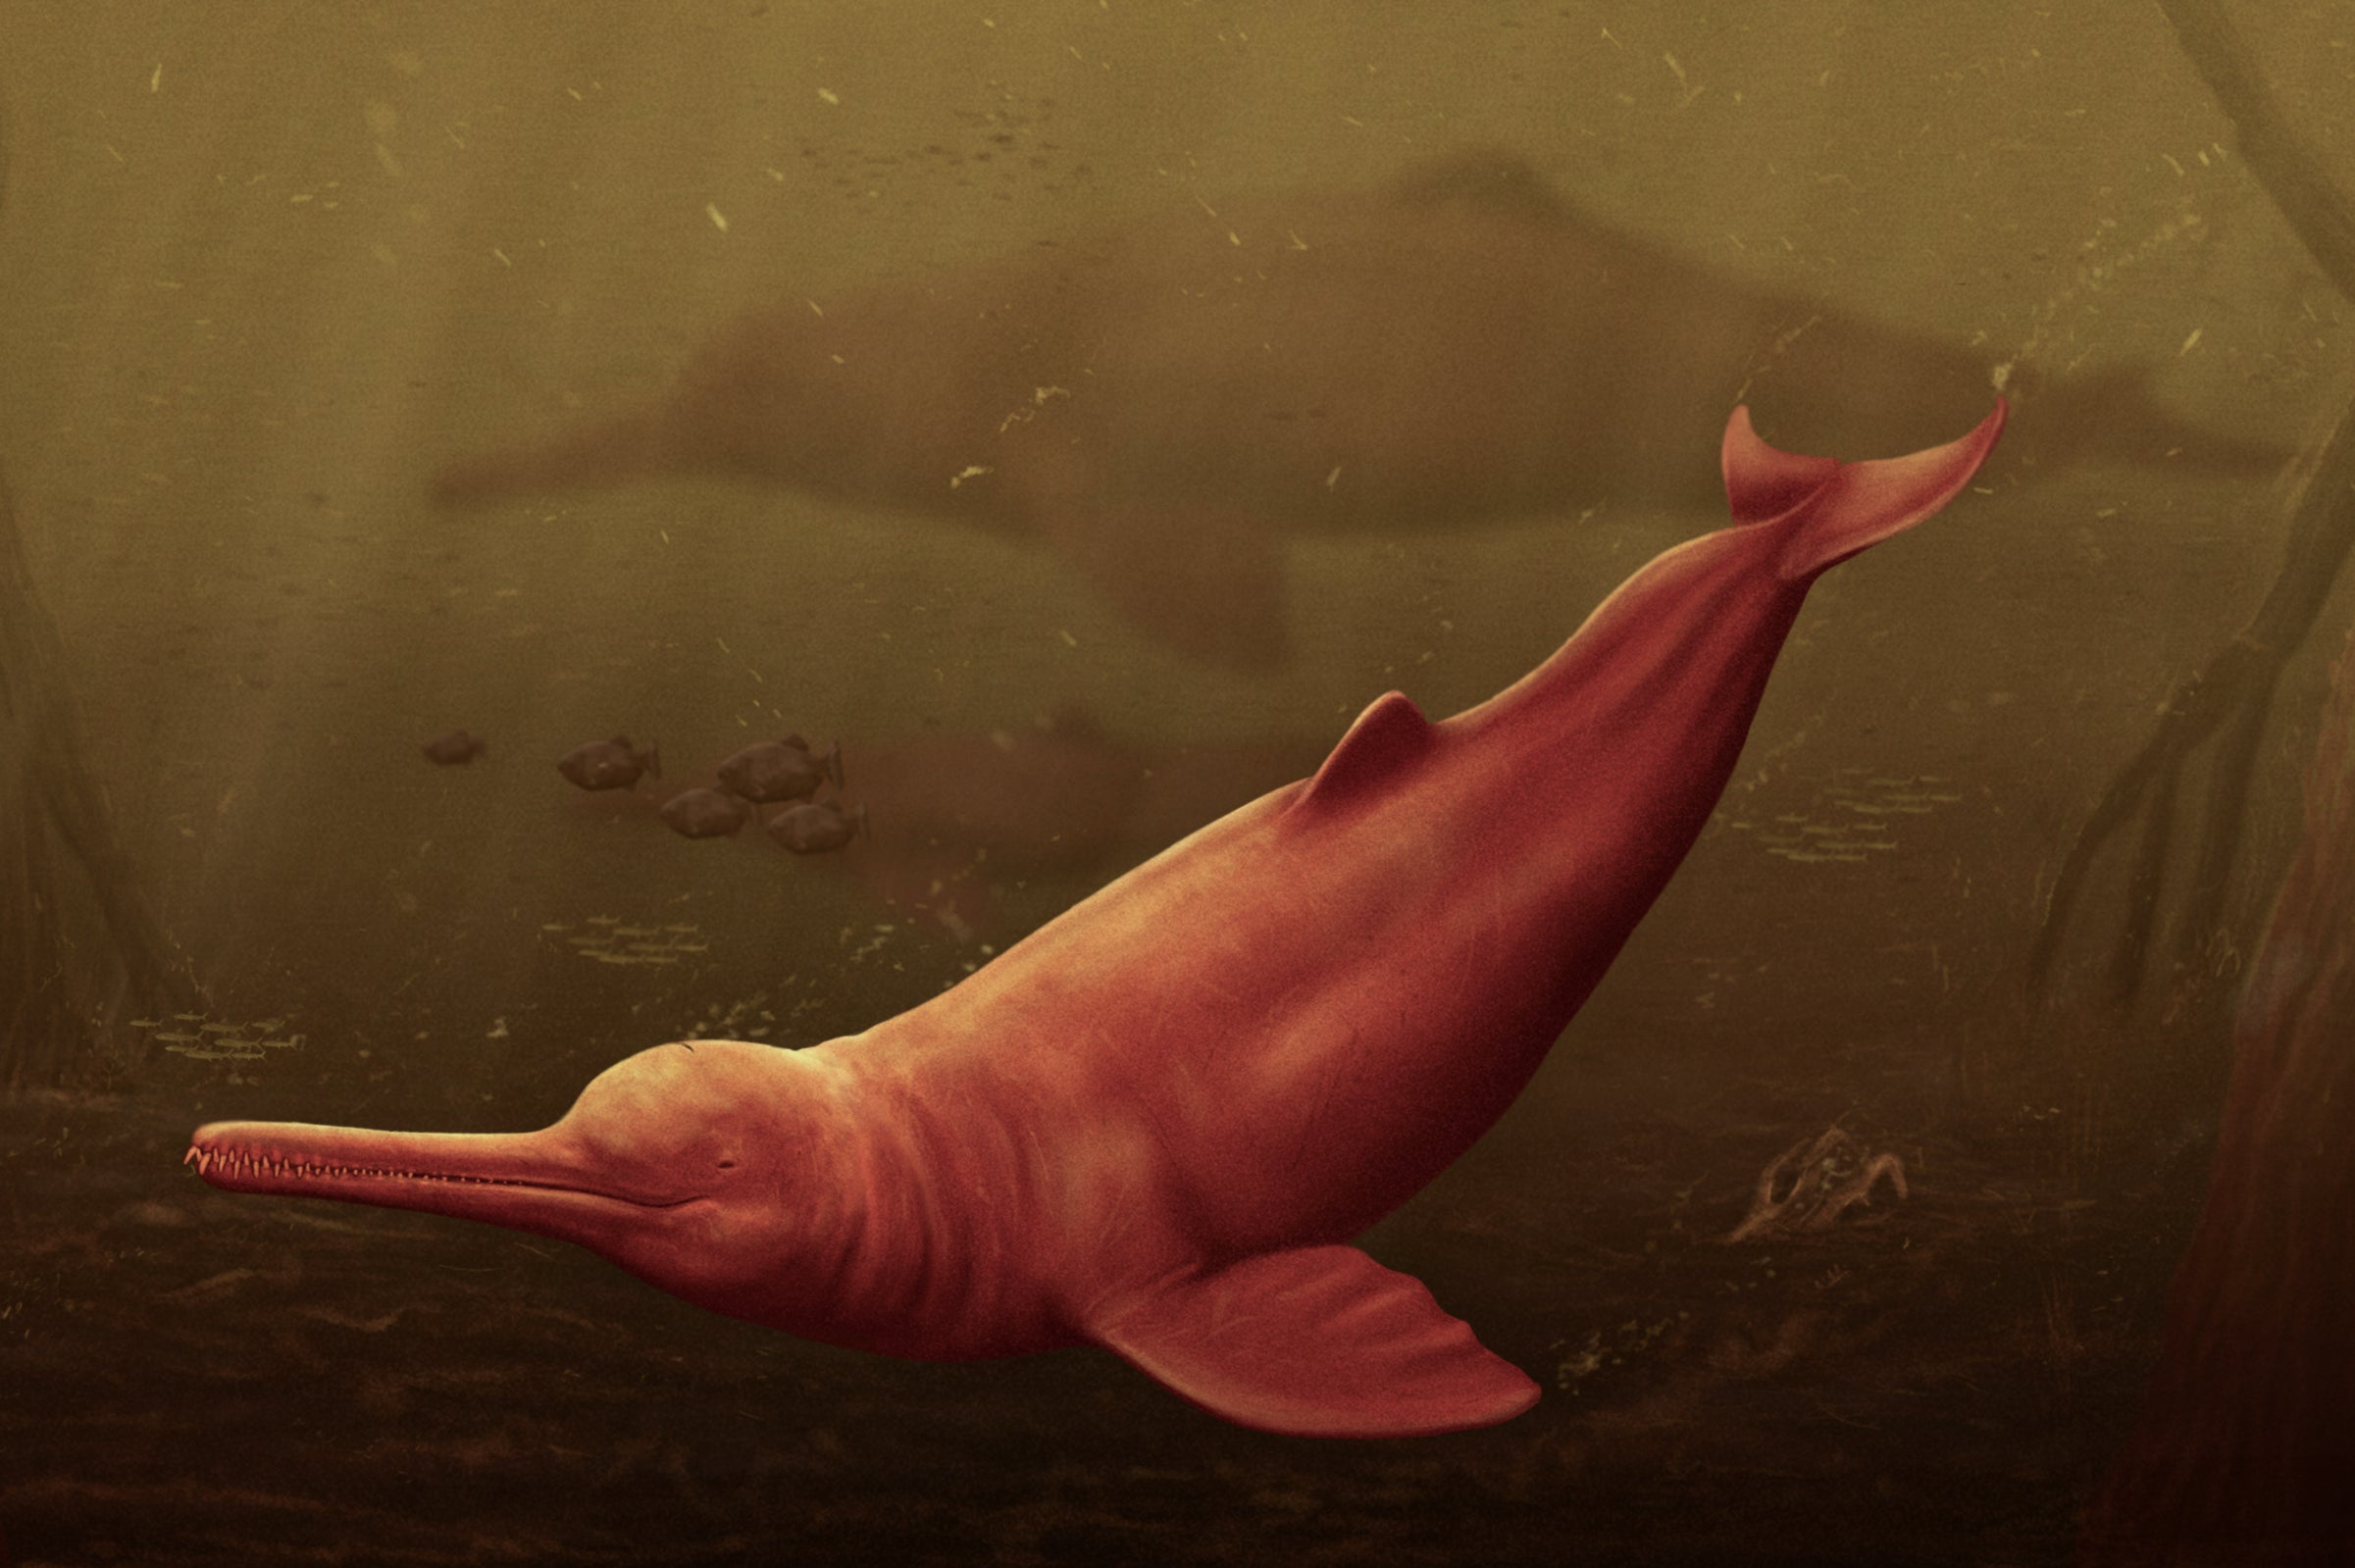 The Pebanista yacuruna is thought to have been 3 to 3.5 meters long